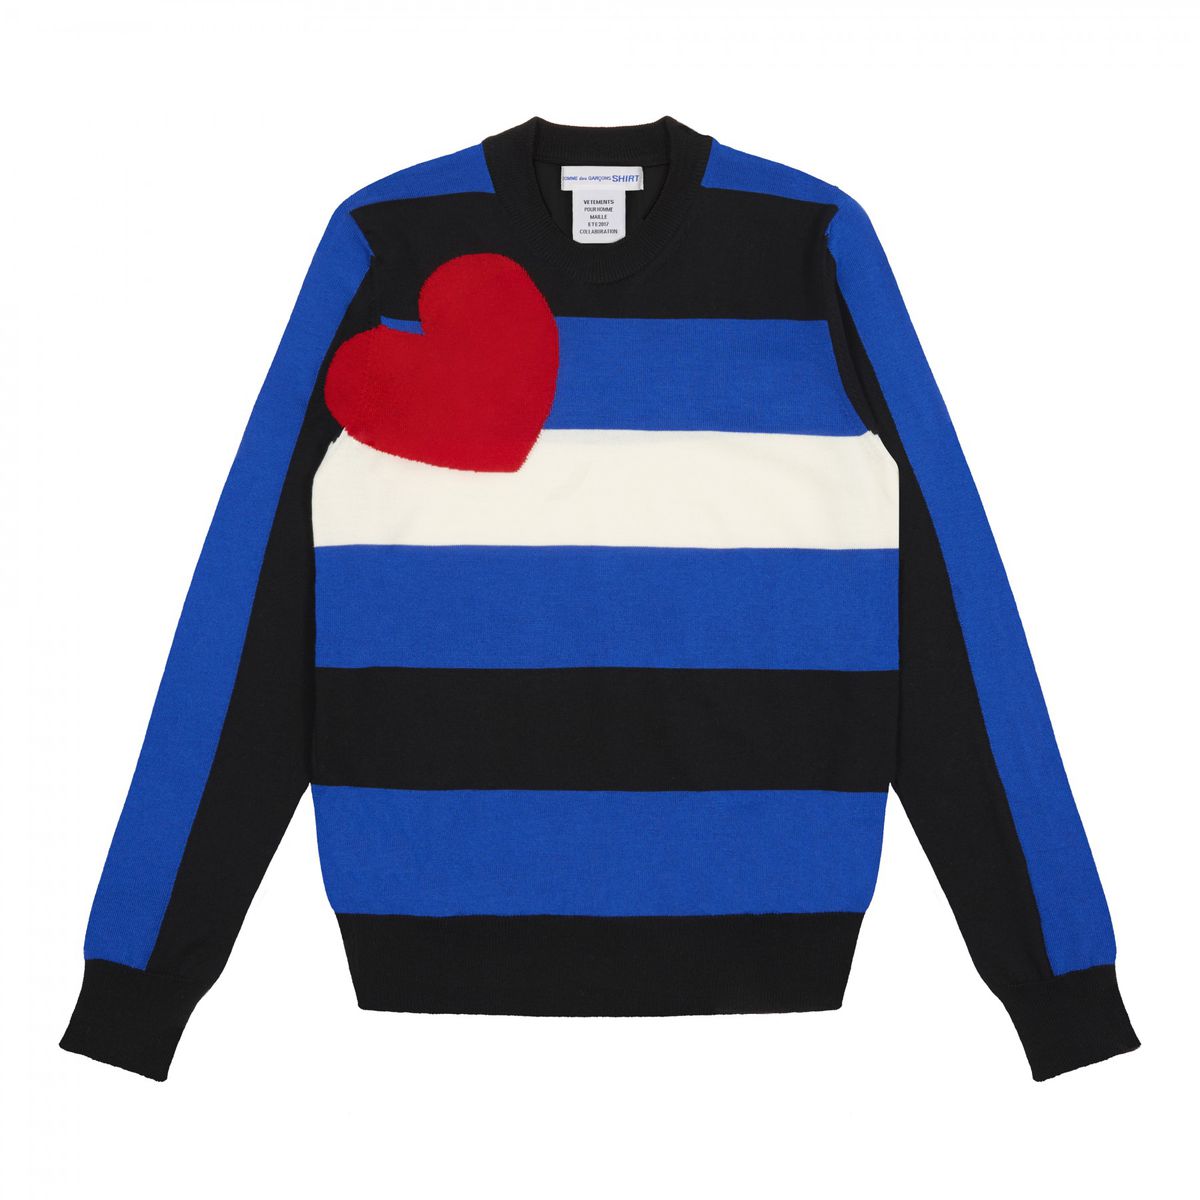 Striped “fetish” sweater with red heart near shoulder